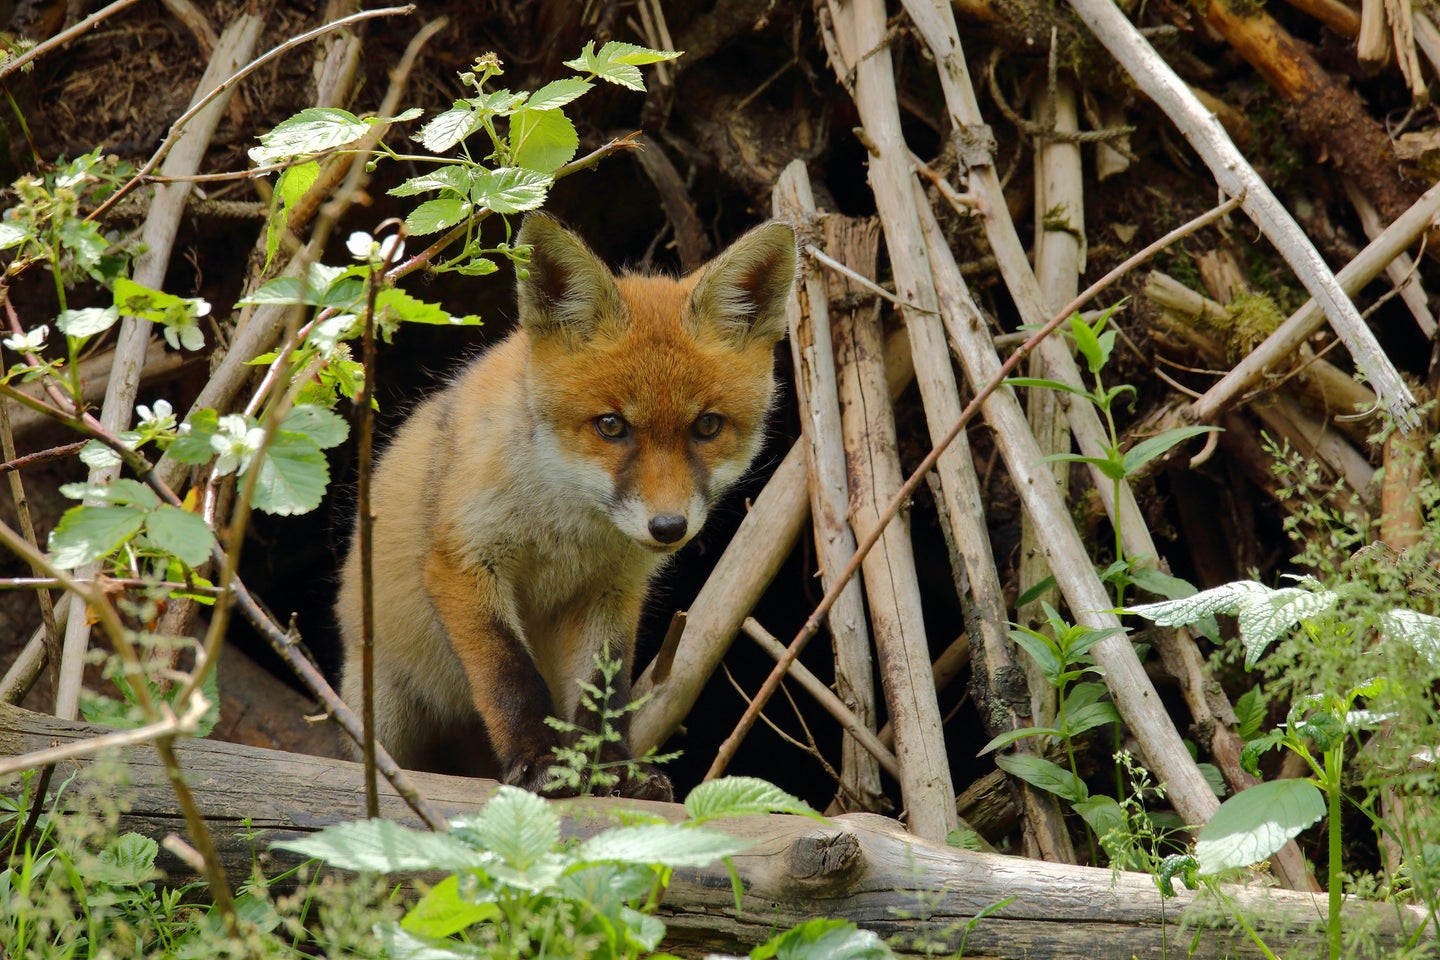 Red fox pup emerging from a den in the woods.